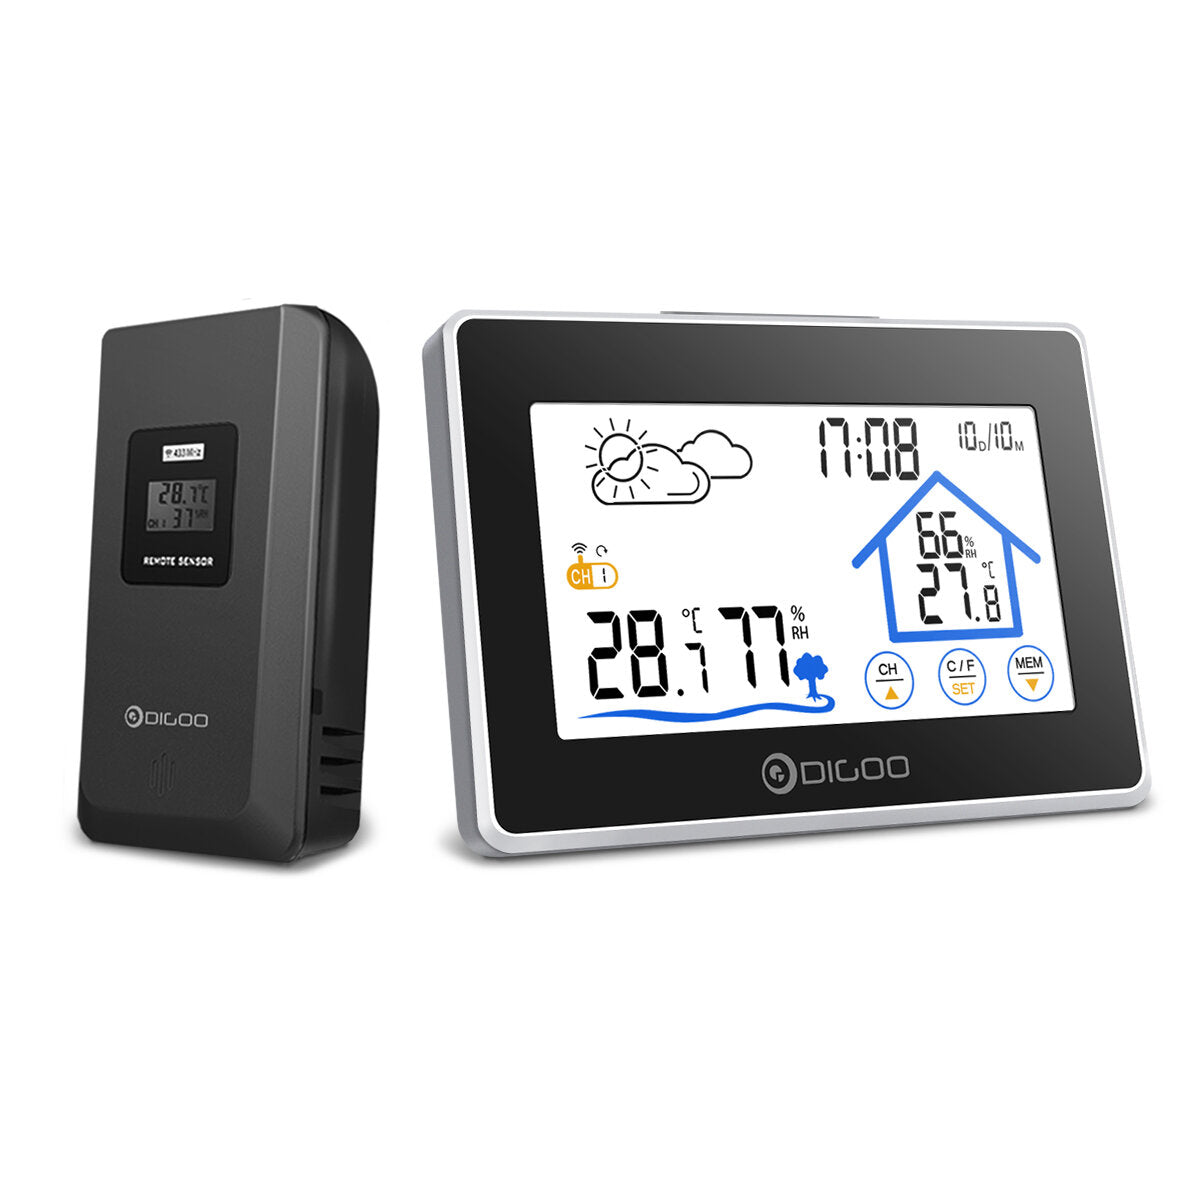 Wireless Thermometer Hygrometer Touch Screen Weather Station With Thermometer Outdoor Forecast Sensor Clock